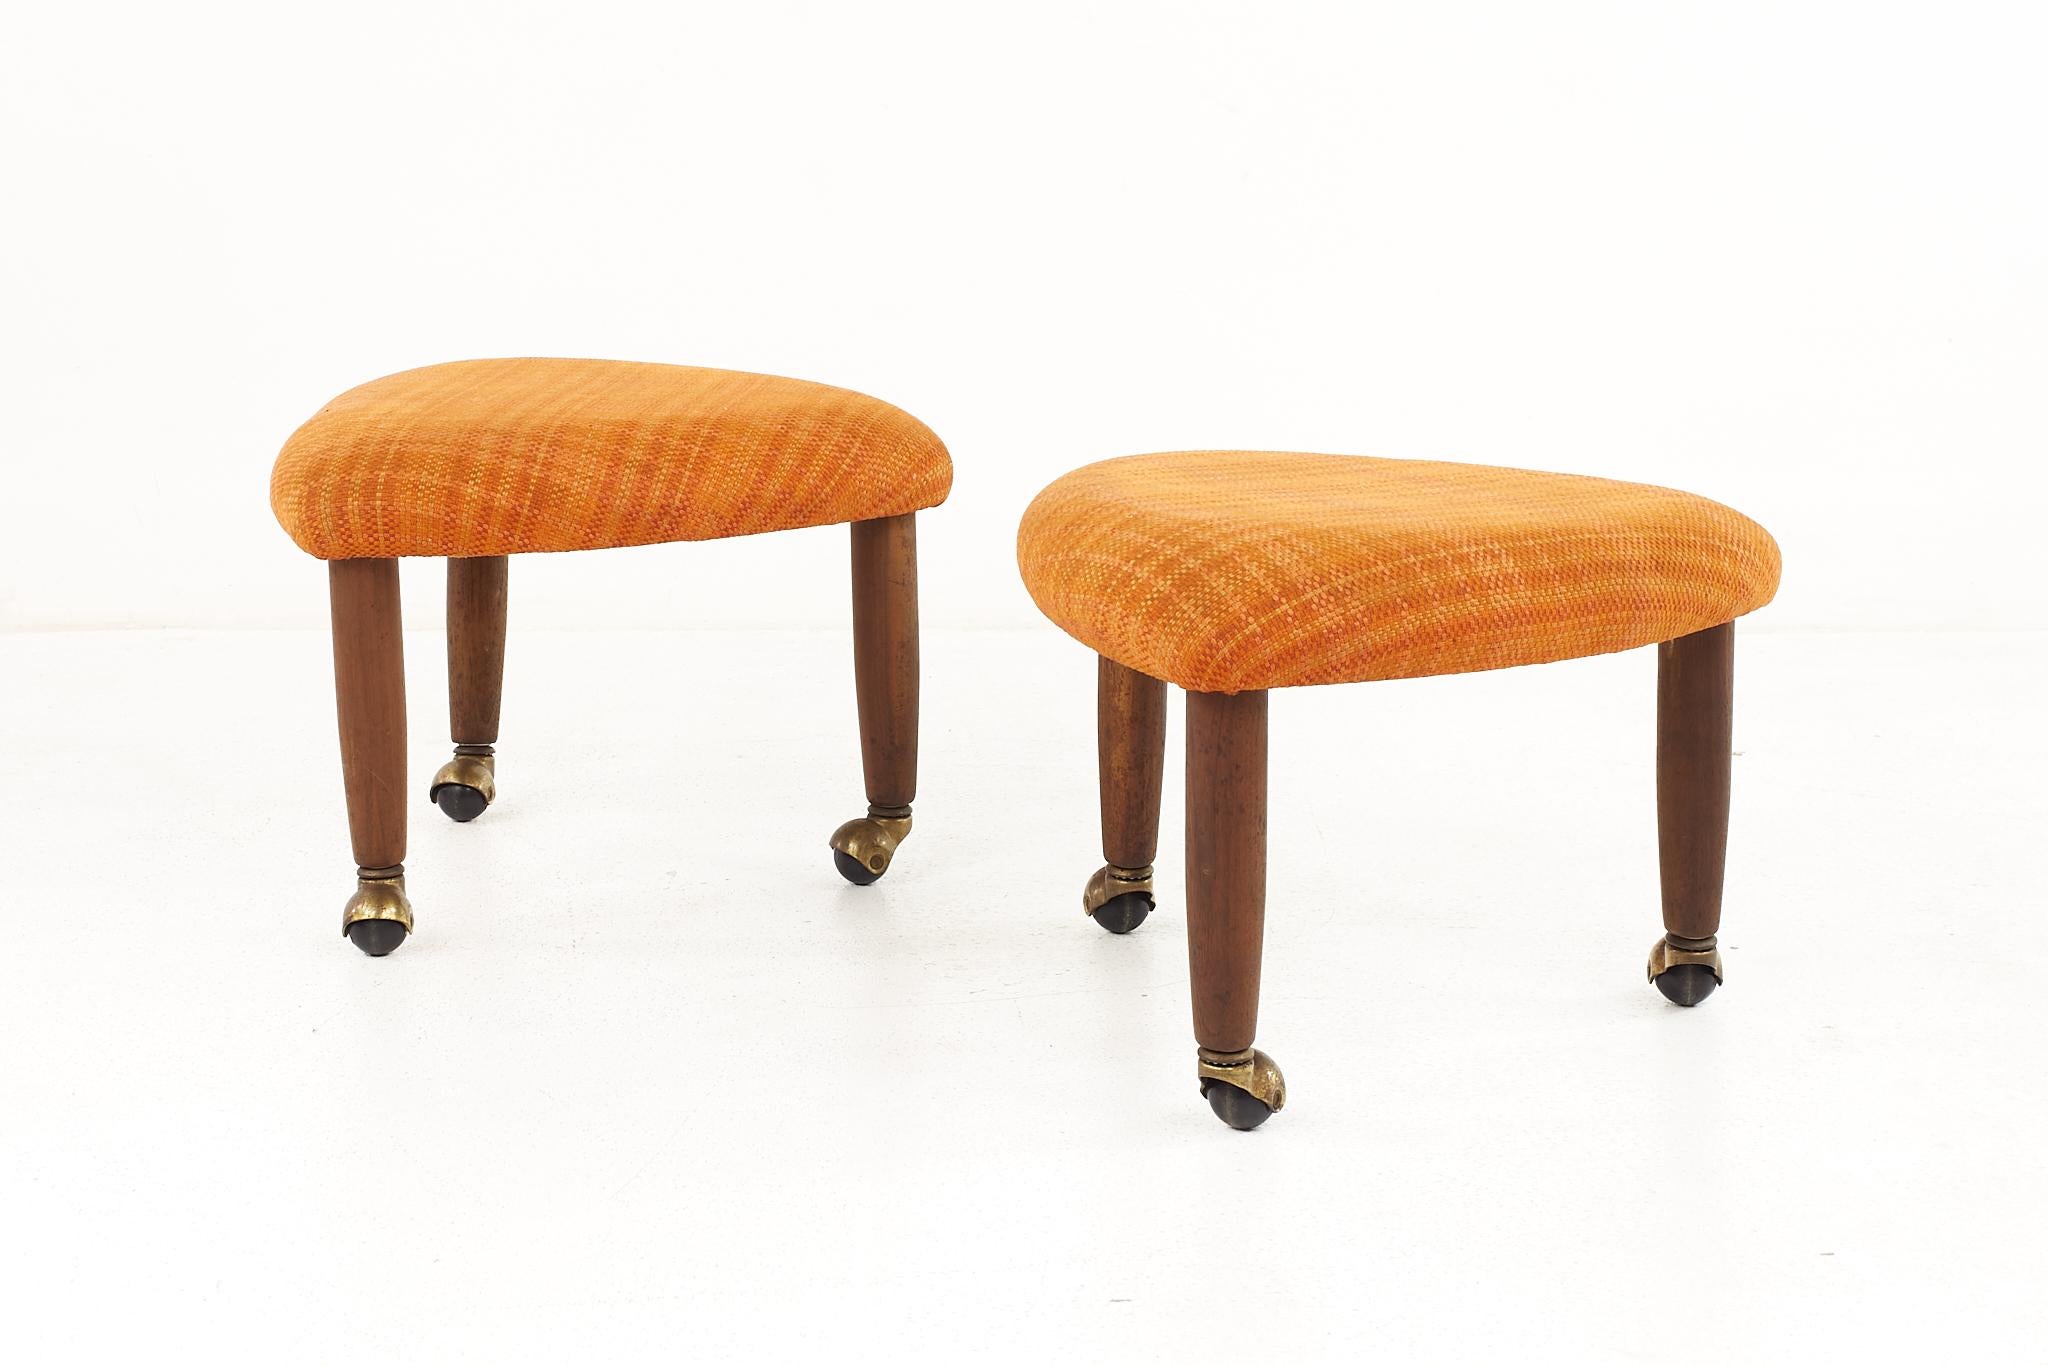 Adrian Pearsall for Craft Associates mid-century walnut ottoman on casters - a pair.

Each ottoman measures: 19 wide x 19 deep x 13.5 high, with a seat height of 13.5 inches

All pieces of furniture can be had in what we call restored vintage